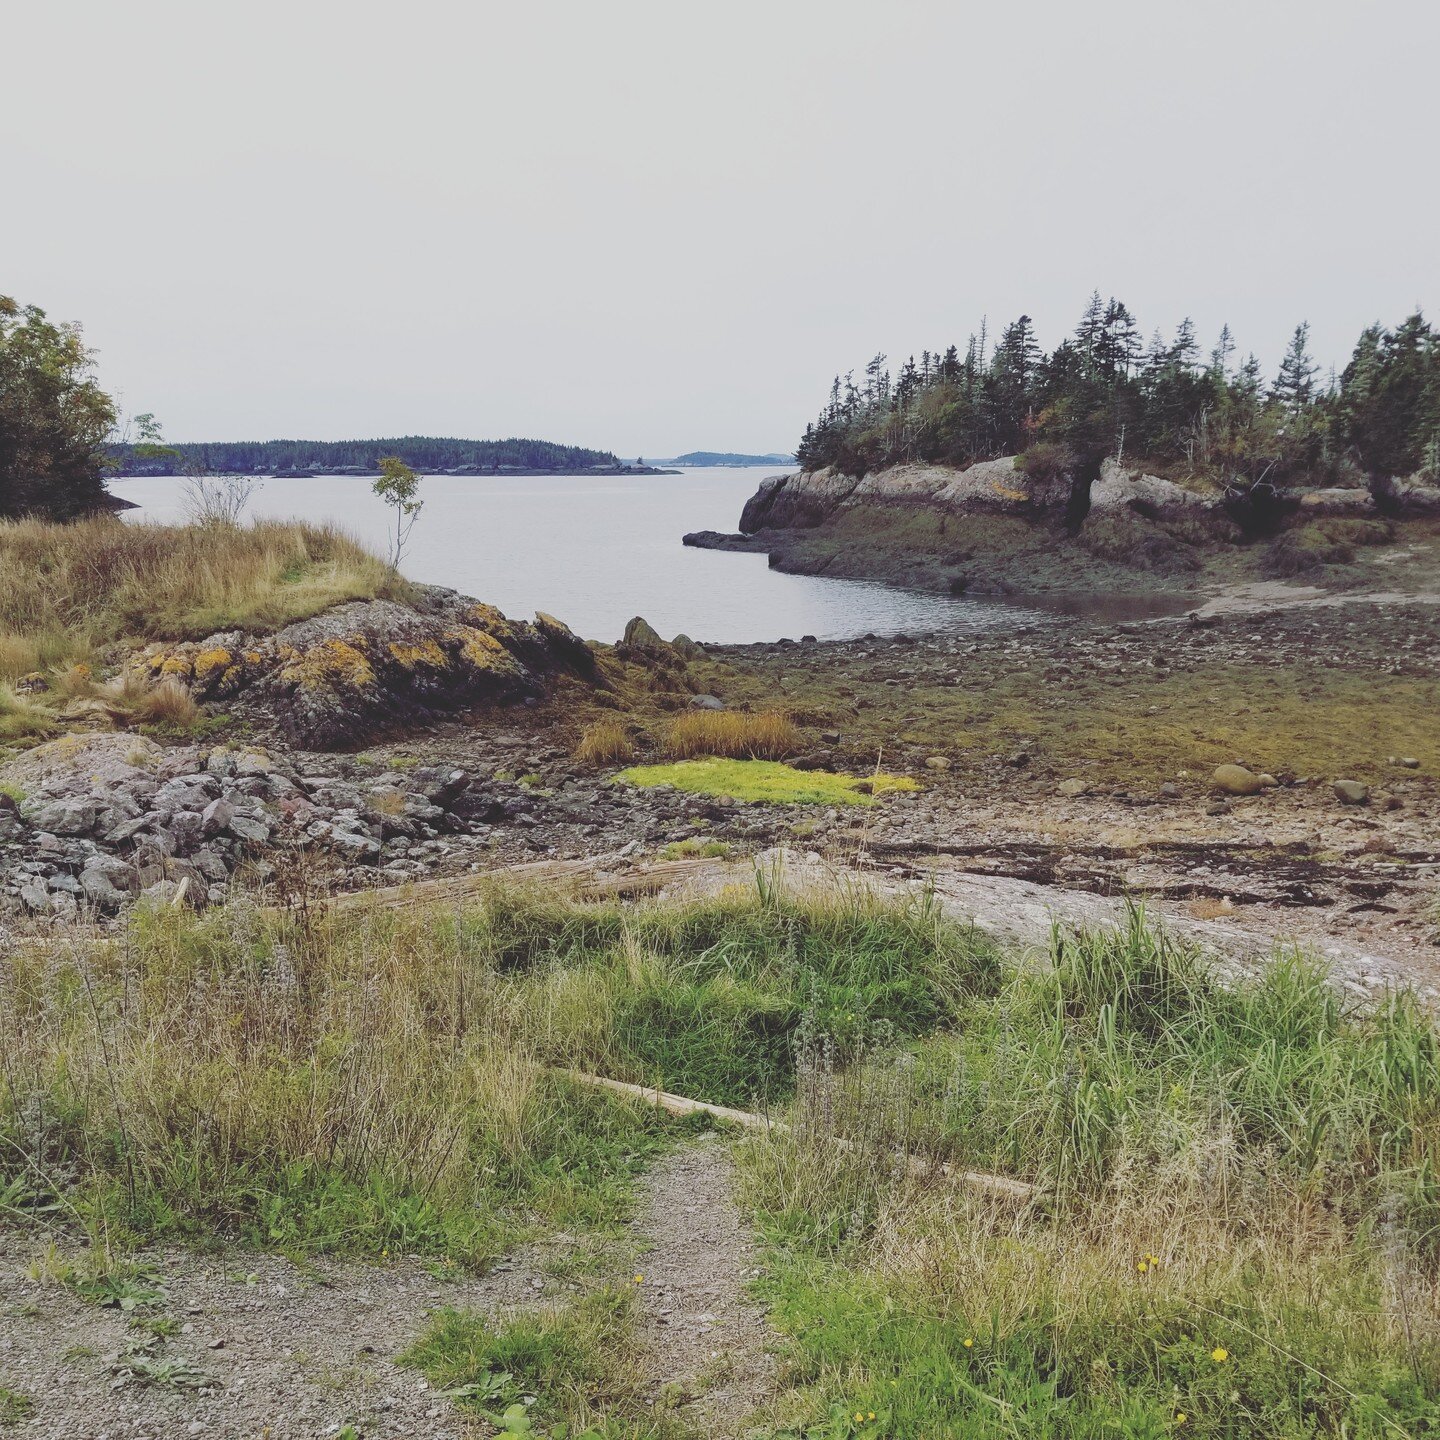 Waiting to take the ferry to #Grand Manan Island at Blacks Harbour? Take a little walk around - you will see amazing lichen and some interesting flora, and note whether the tide is in or out. And within walking distance is a little beach with amazing